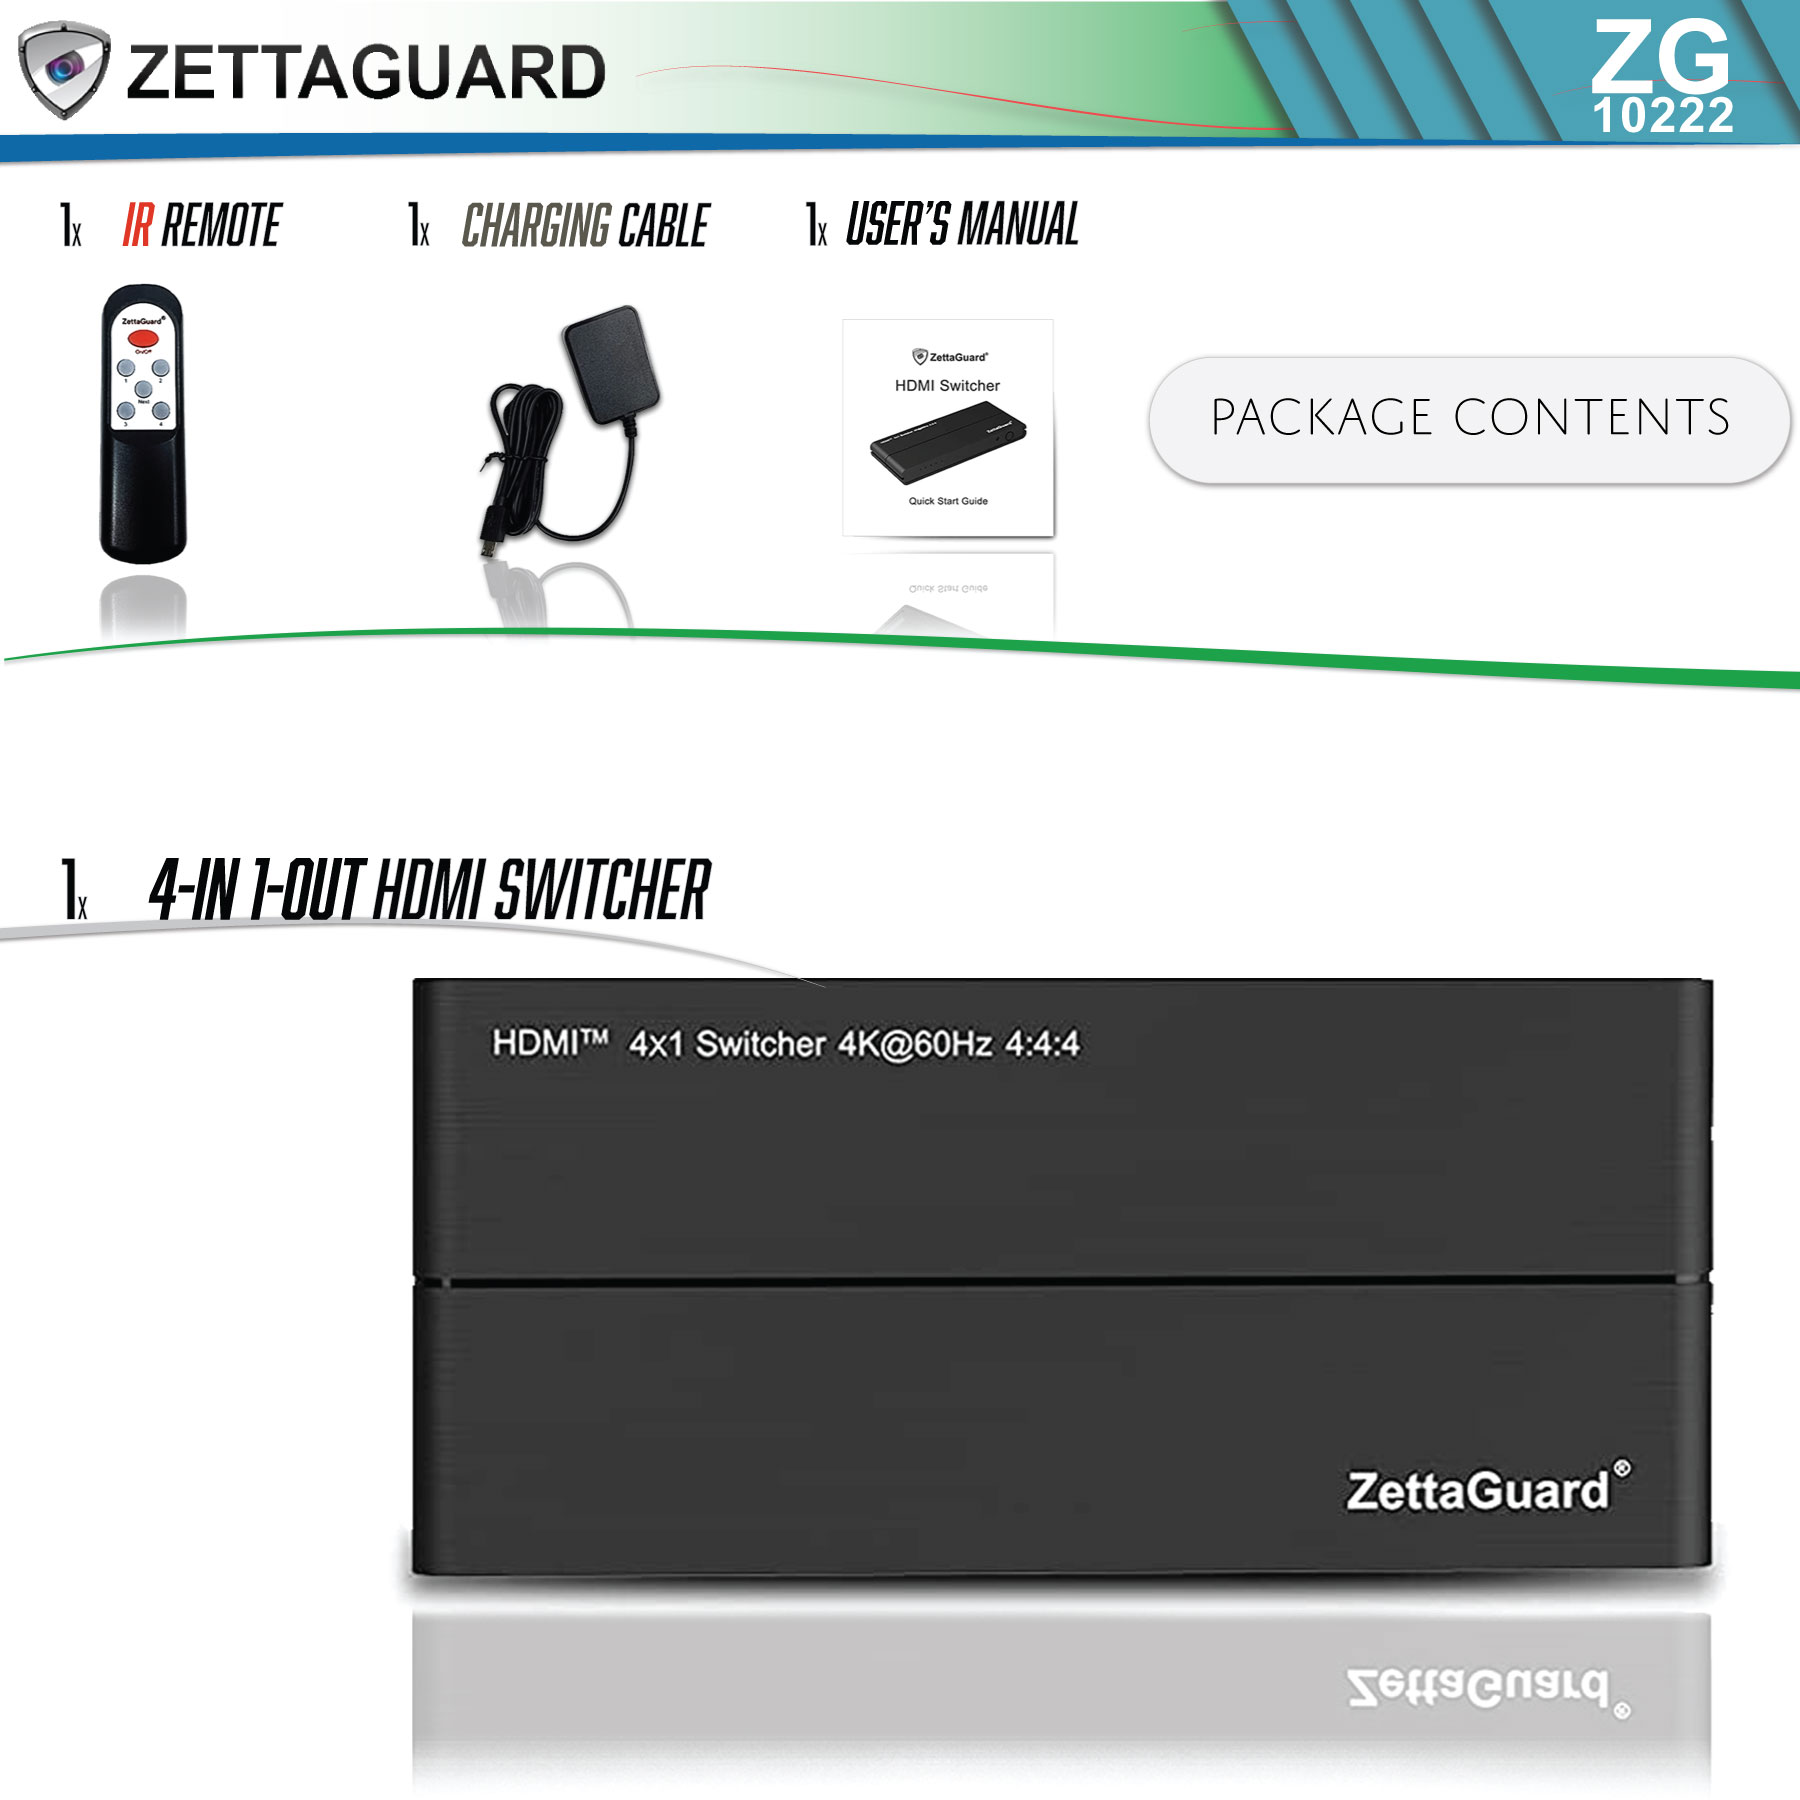 Zettaguard HDMI 2.0 Switcher Supports 4K HDR 4 Ports Hi-Speed 18Gbps HDCP 2.2, Auto-switching, IR Remote - Compatible with Apple Tv, Roku, Xbox/PS4, Blu-Ray, Macbook, Laptop, PC, TV for Home or Office - image 2 of 10